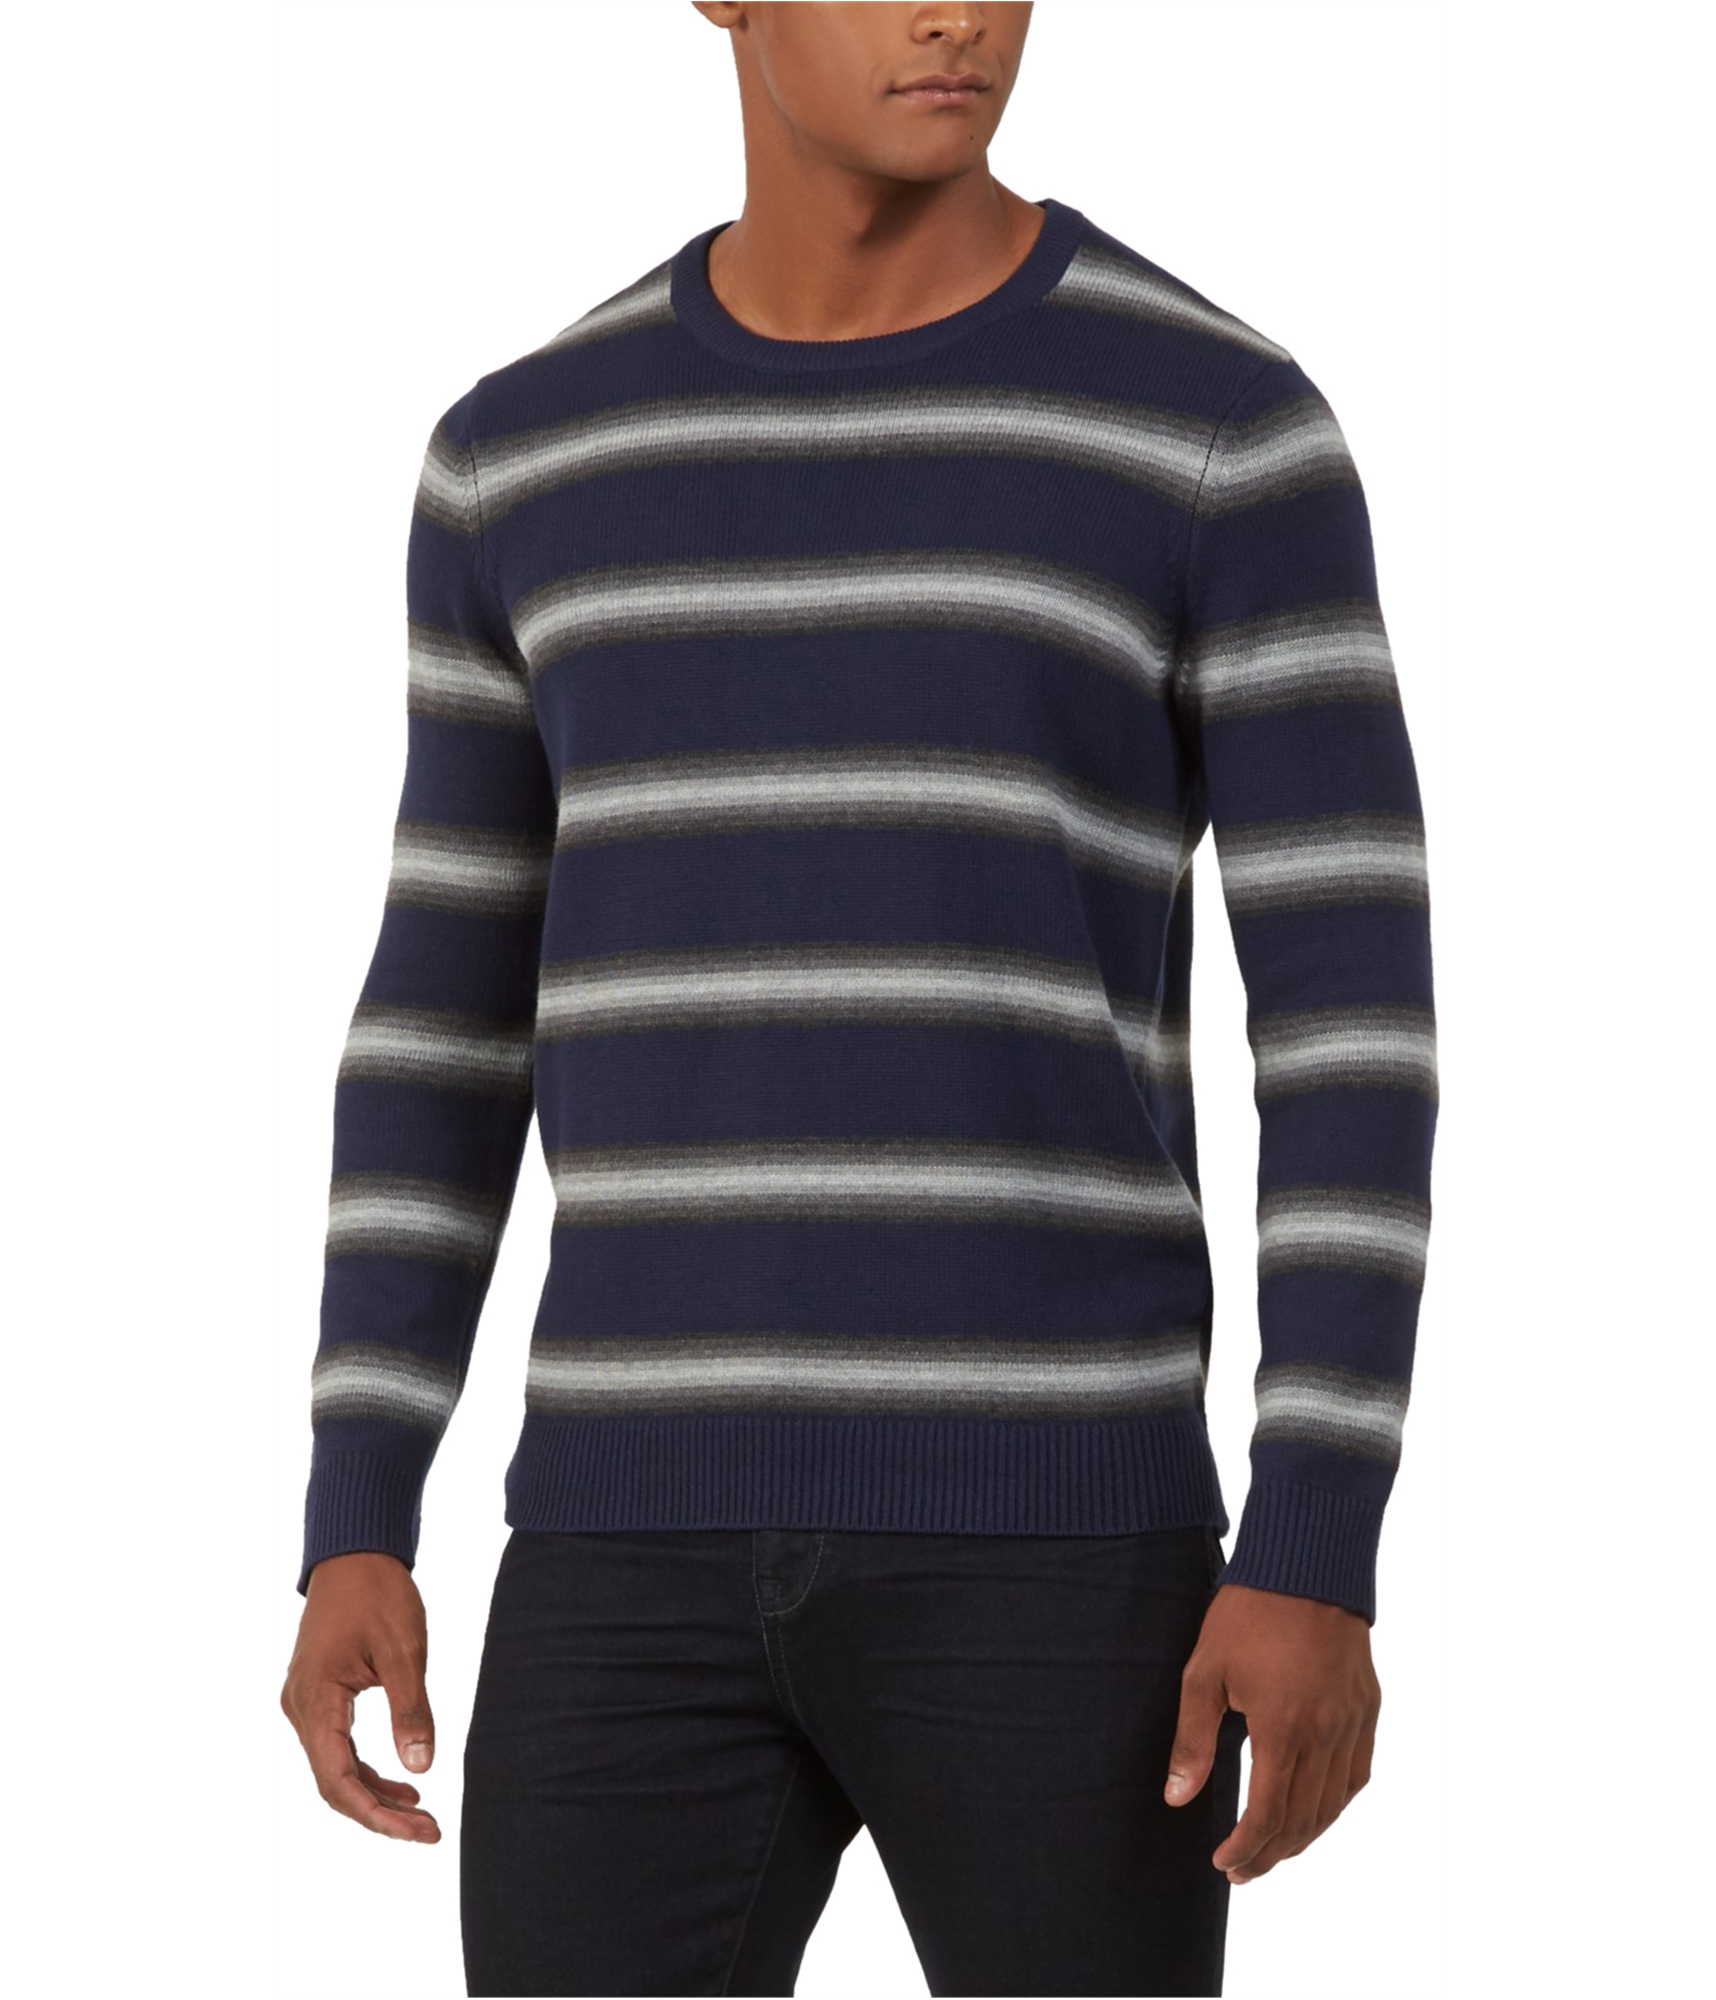 Kenneth Cole Mens Striped Ombre Pullover Sweater, Blue, Medium | eBay